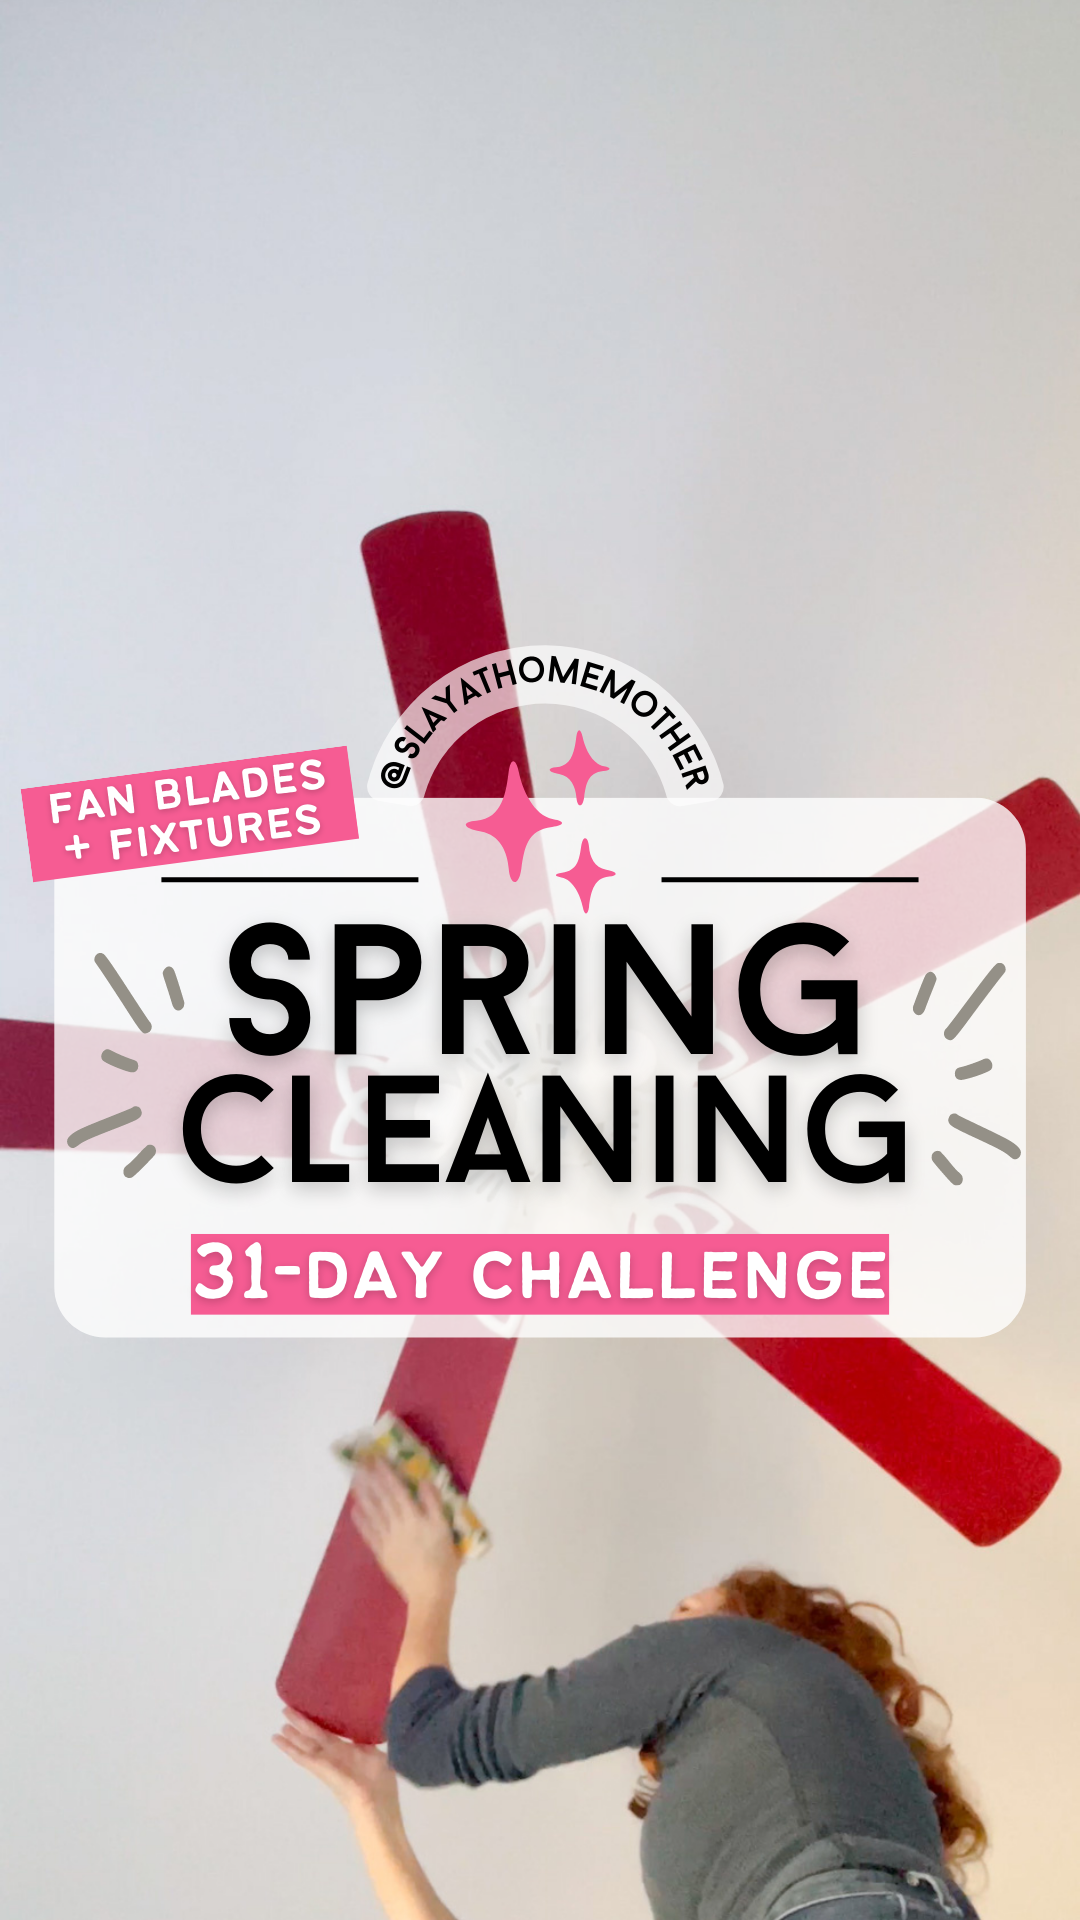 spring cleaning challenge - fan blades